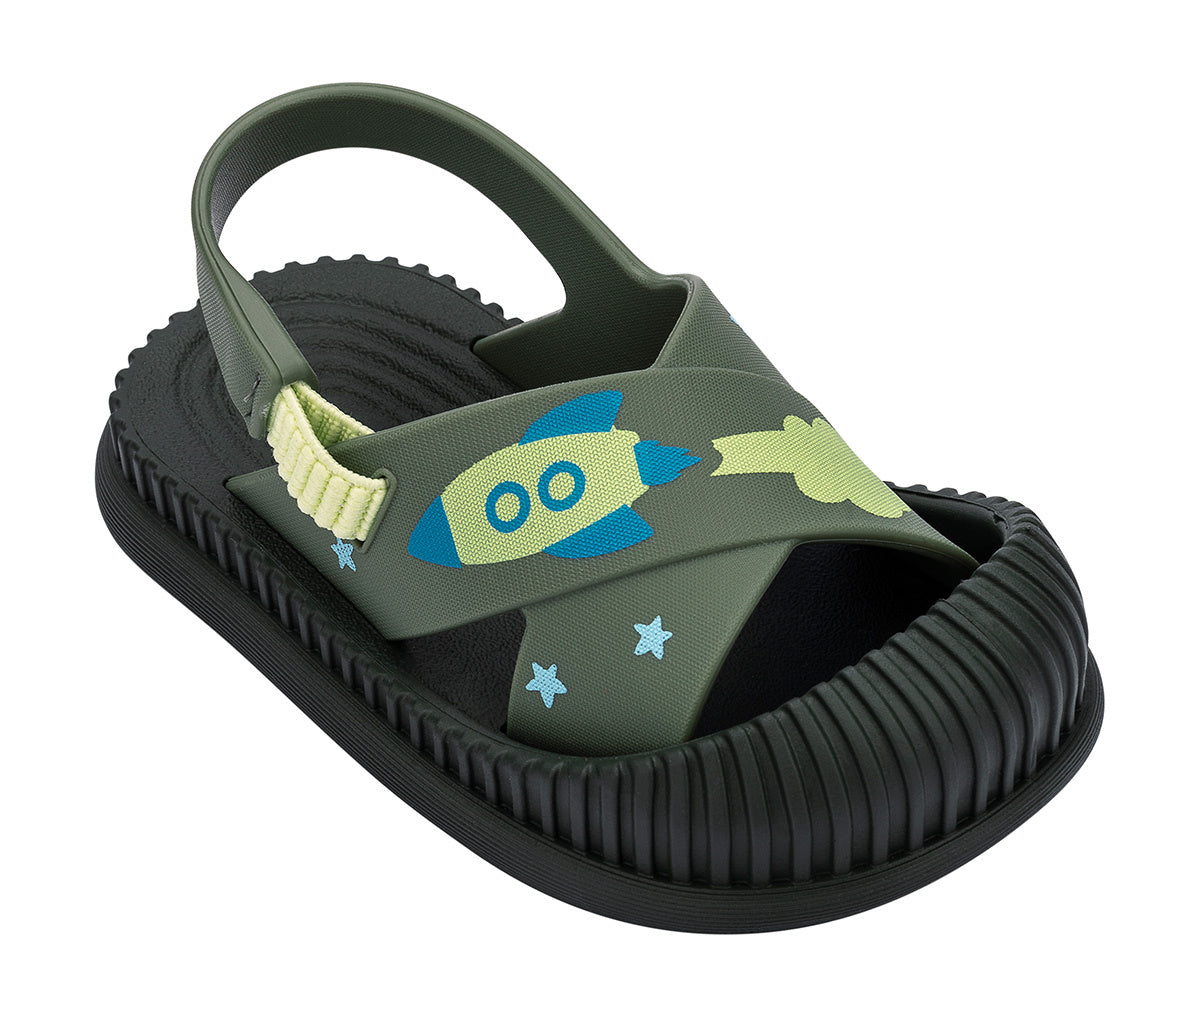 Angled view of a green Ipanema Cute baby sandal with rocket ship on the strap.